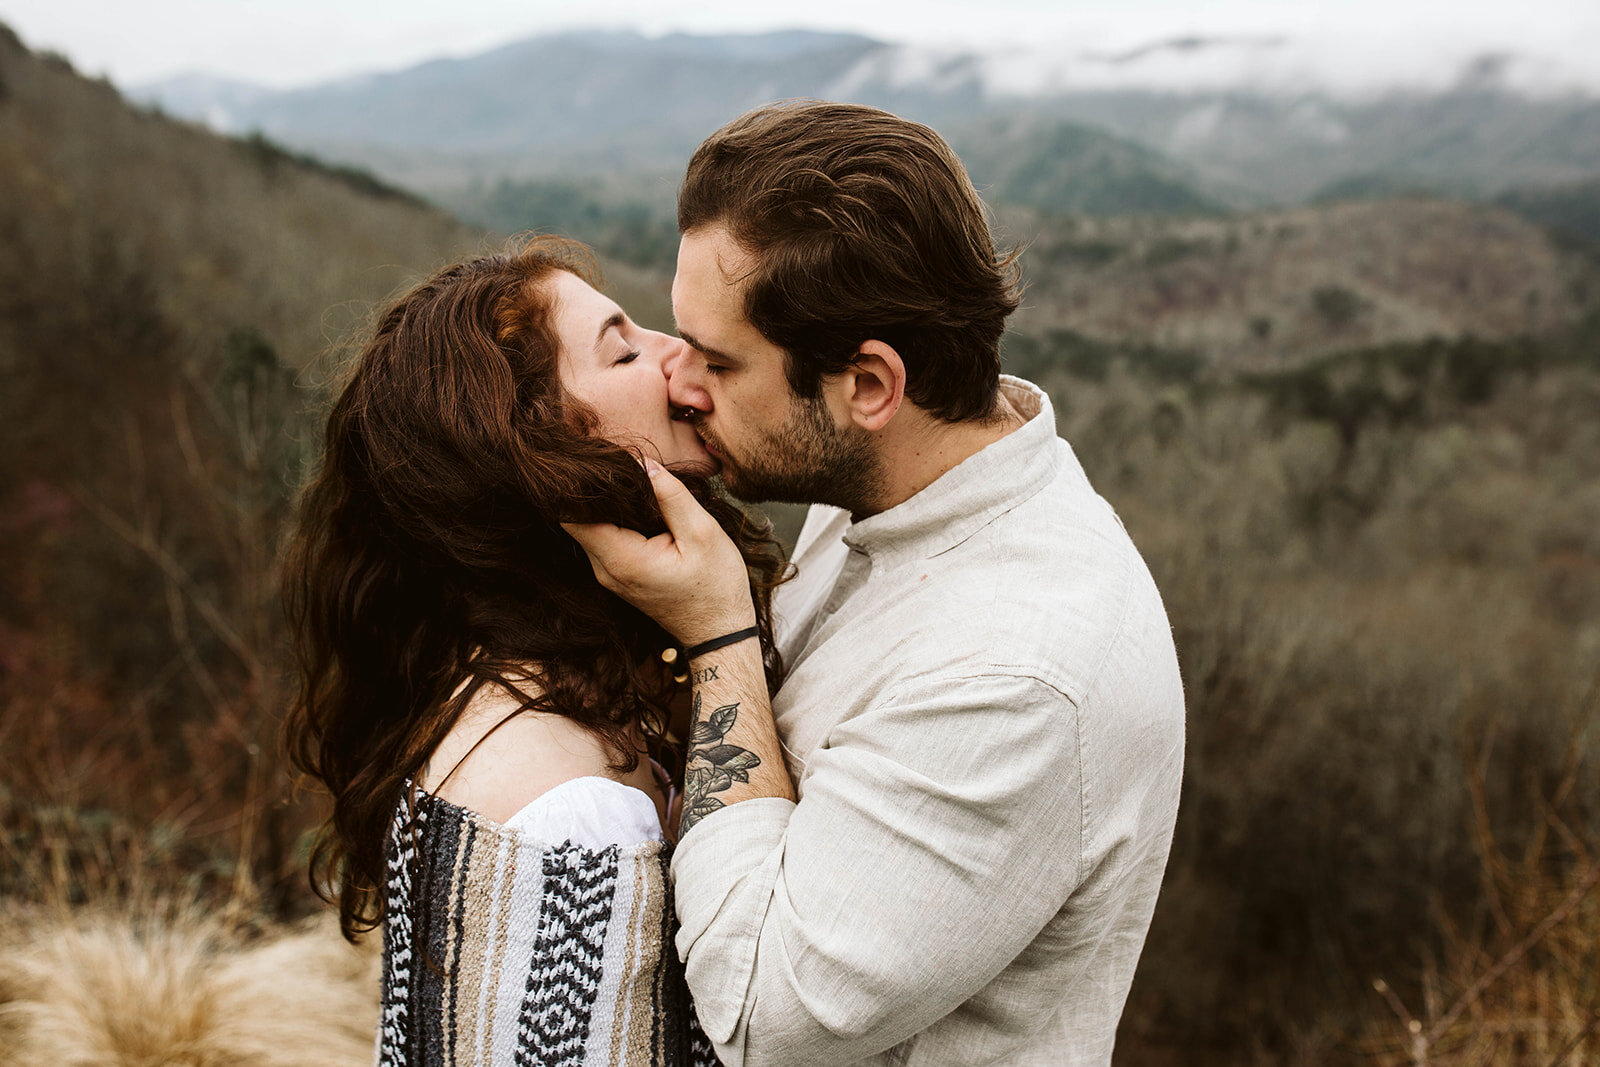 adventure-engagement-in-the-great-smoky-mountains-chattanooga-elopement-photographer5Y6A5732_websize.jpg